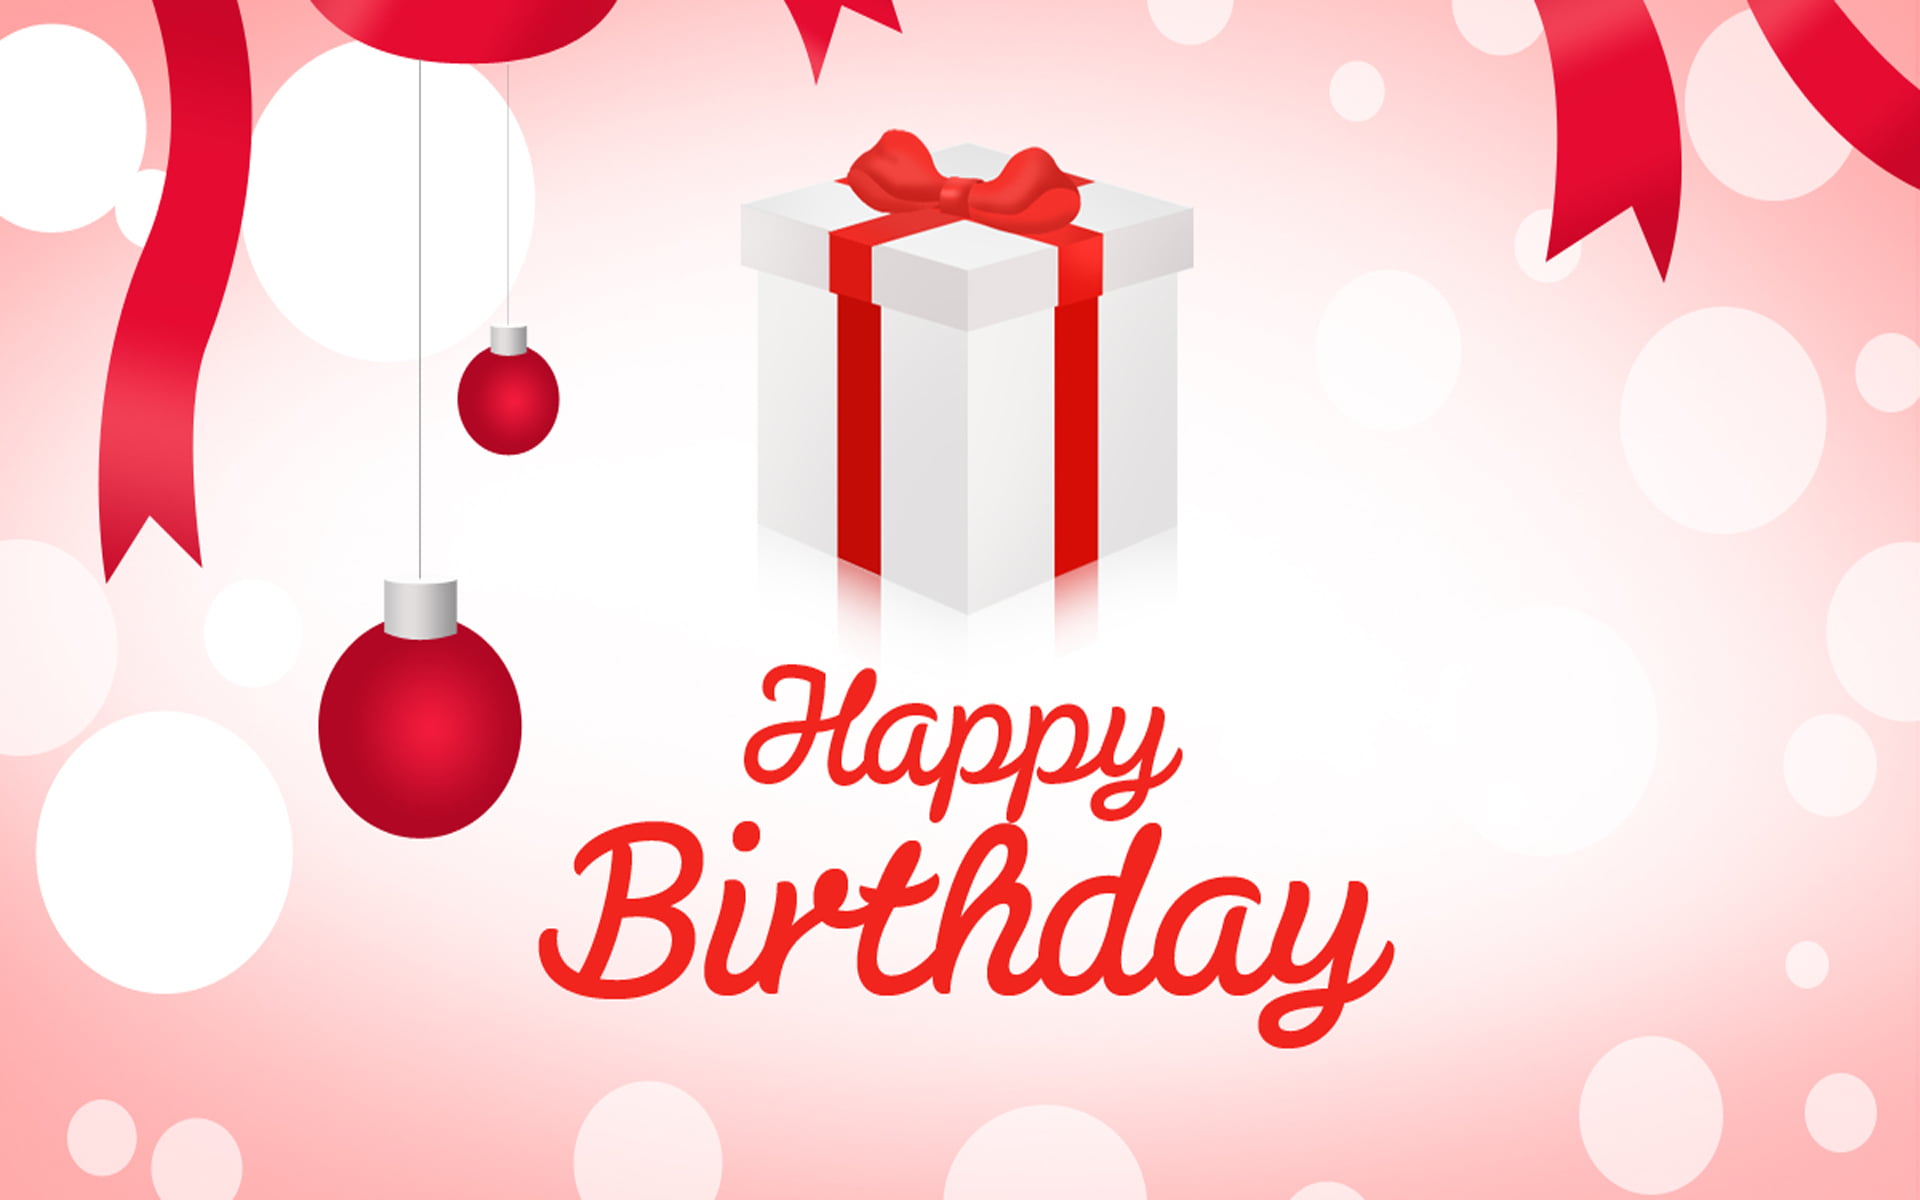 10 Best Happy Birthday Wishes with Images - Quotes Square